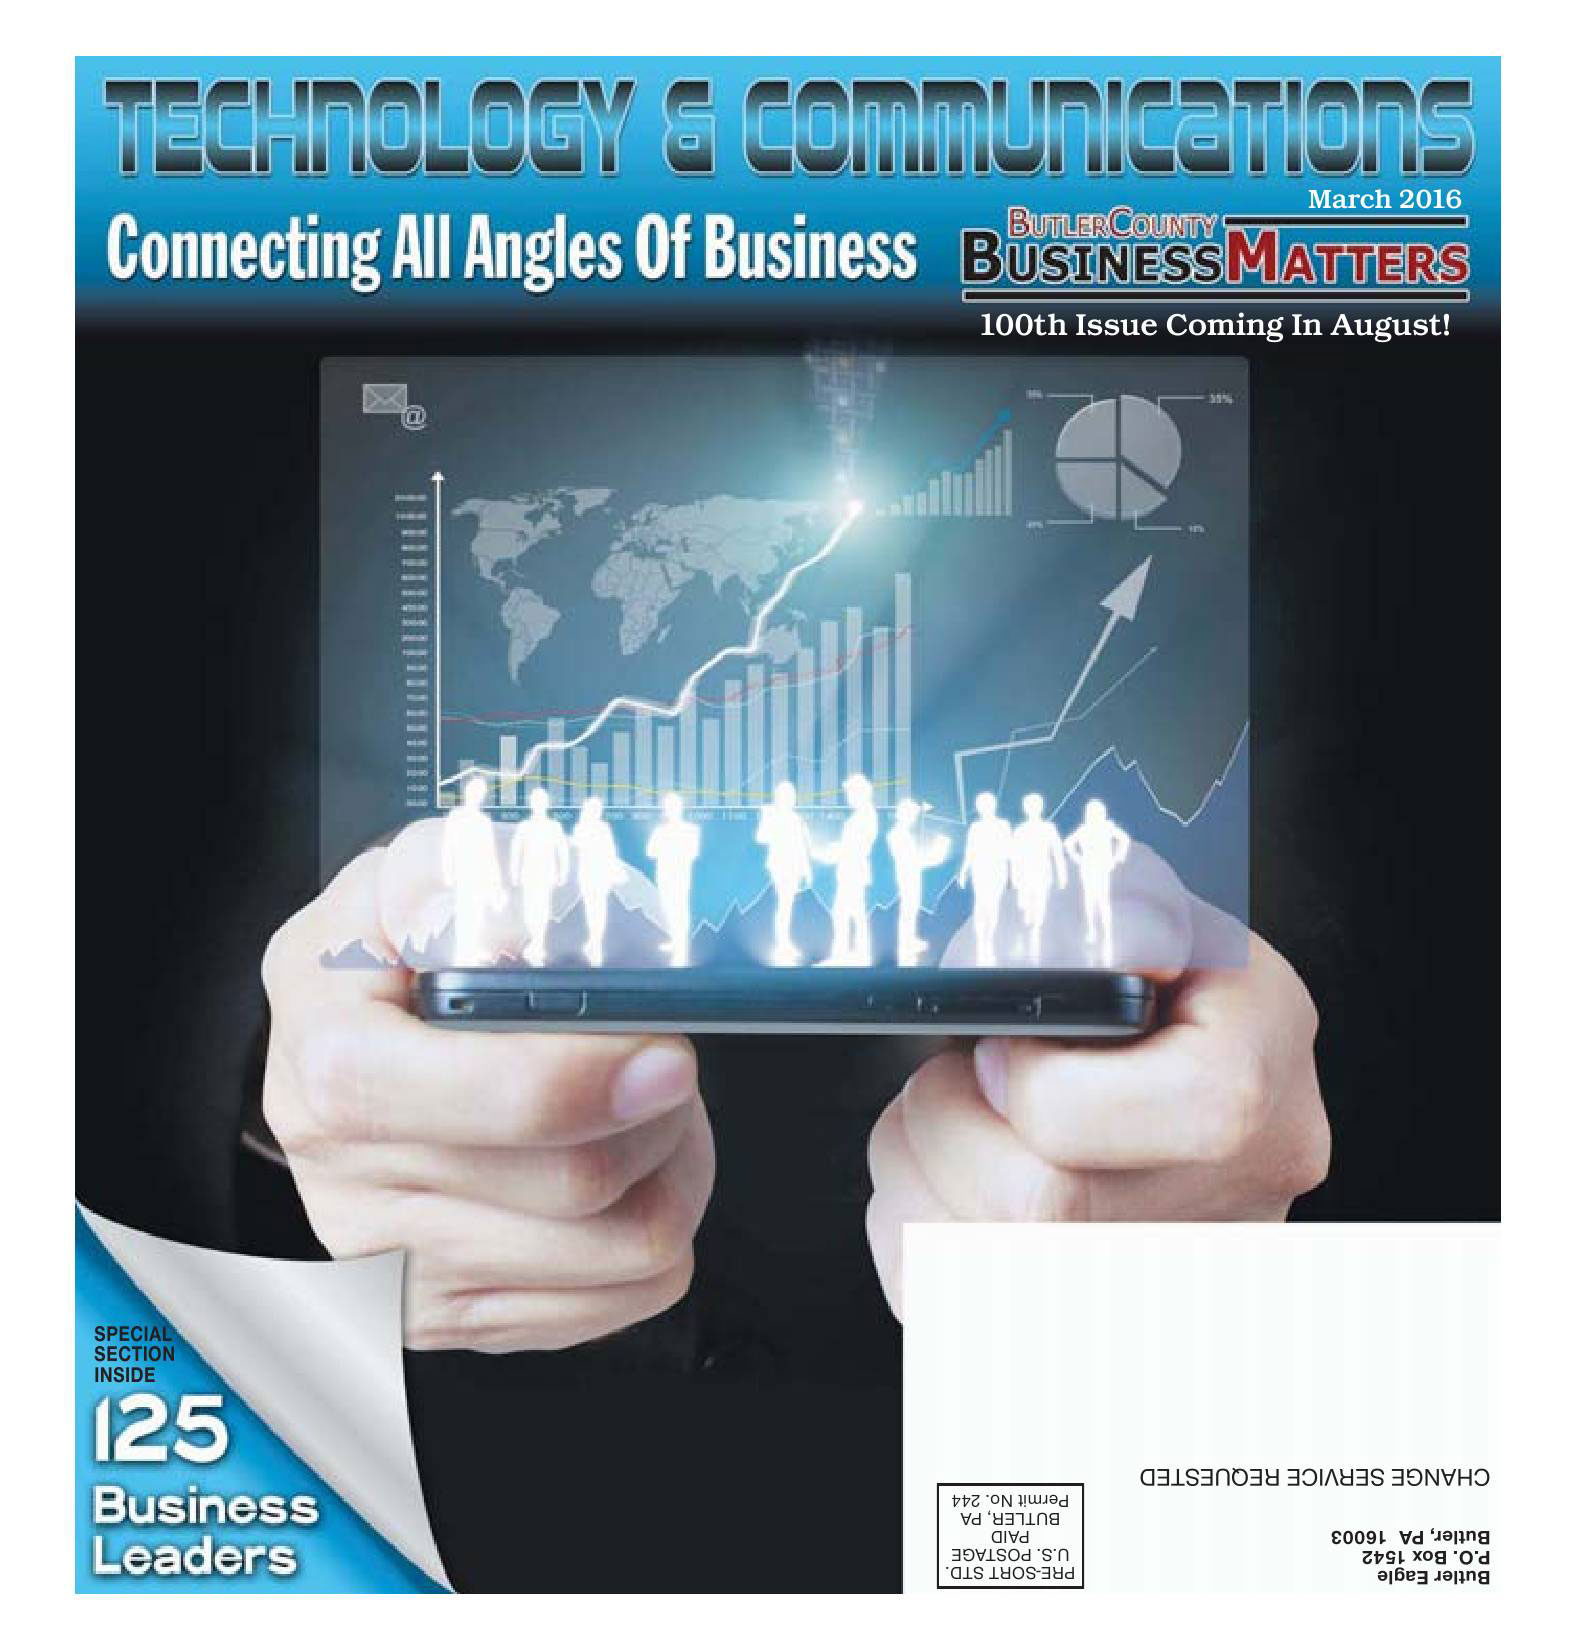 March 2016 - Technology & Communications - Connecting All Angles of Business